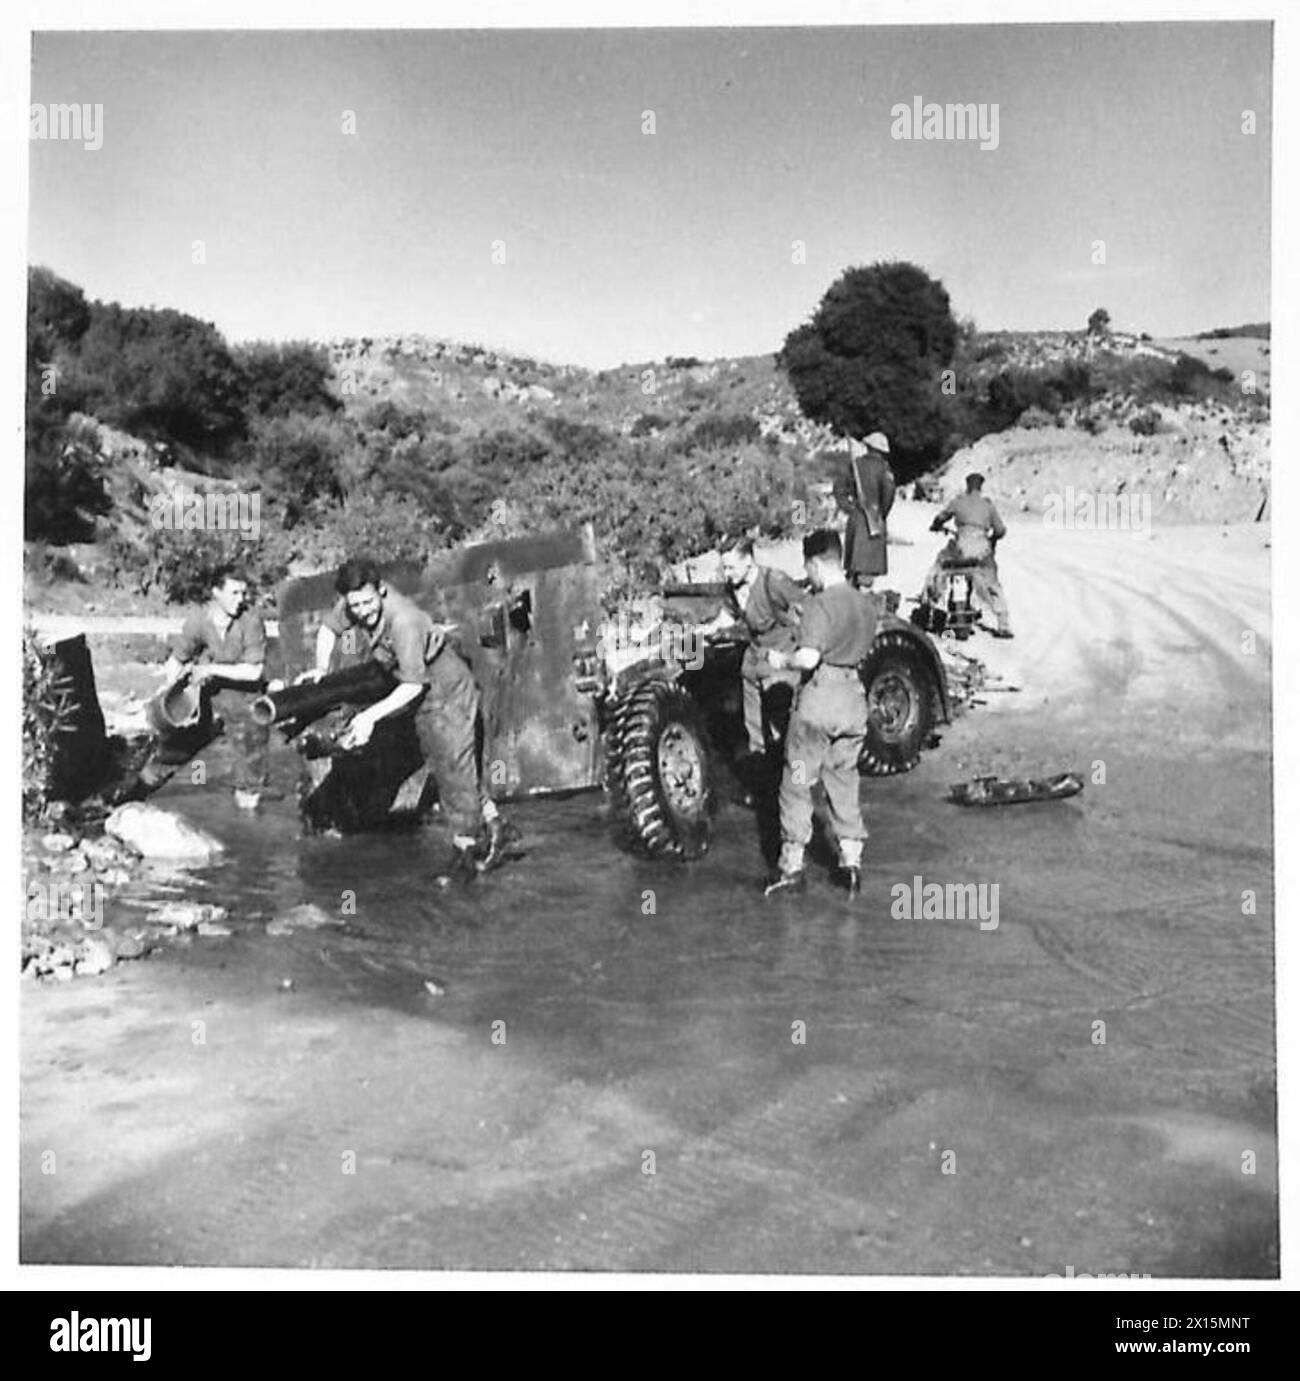 THE BRITISH ARMY IN THE TUNISIA CAMPAIGN, NOVEMBER 1942-MAY 1943 - Crew of a 25 pounder artillery gun taking advantage of a lull to wash down their gun and ammunition carrier at Siliana, 31 January 1943. Troops of the 6th Battalion, Queen's Own (Royal West Kent) Regiment (78th Infantry Division) arrived at Siliana (Djebel-Bargou Front) and moved through Robba to relieve a French unit in the line. They started to advance and continued to do so the following day. 'C' Company carried on the advance and maintained contact with the Italians and after a severe pounding by 25 pounder artillery guns t Stock Photo